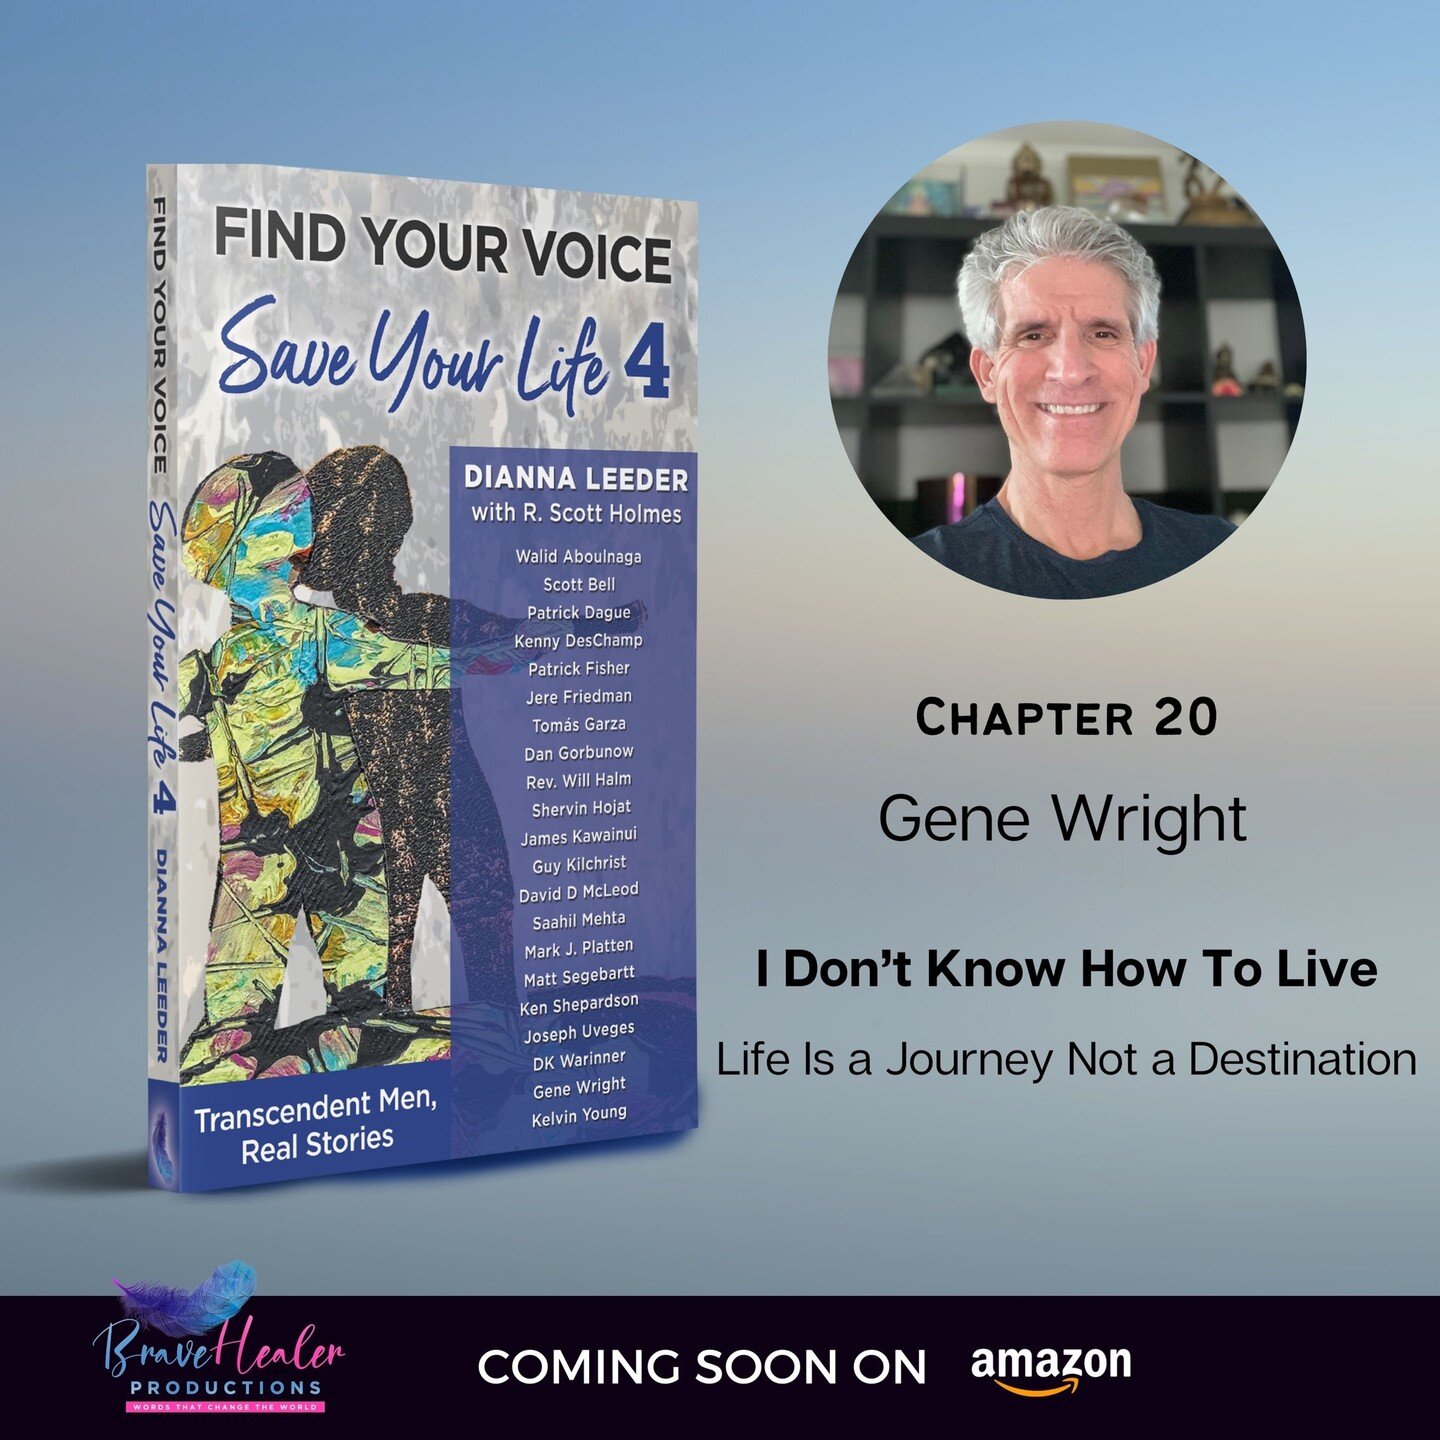 Hey there,
I&rsquo;m excited to share that I&rsquo;ll be a featured author in an upcoming collaborative book published by Brave Healer Productions called: Find Your Voice, Save Your Life 4: Transcendent Men, Real Stories.
This is an incredible projec